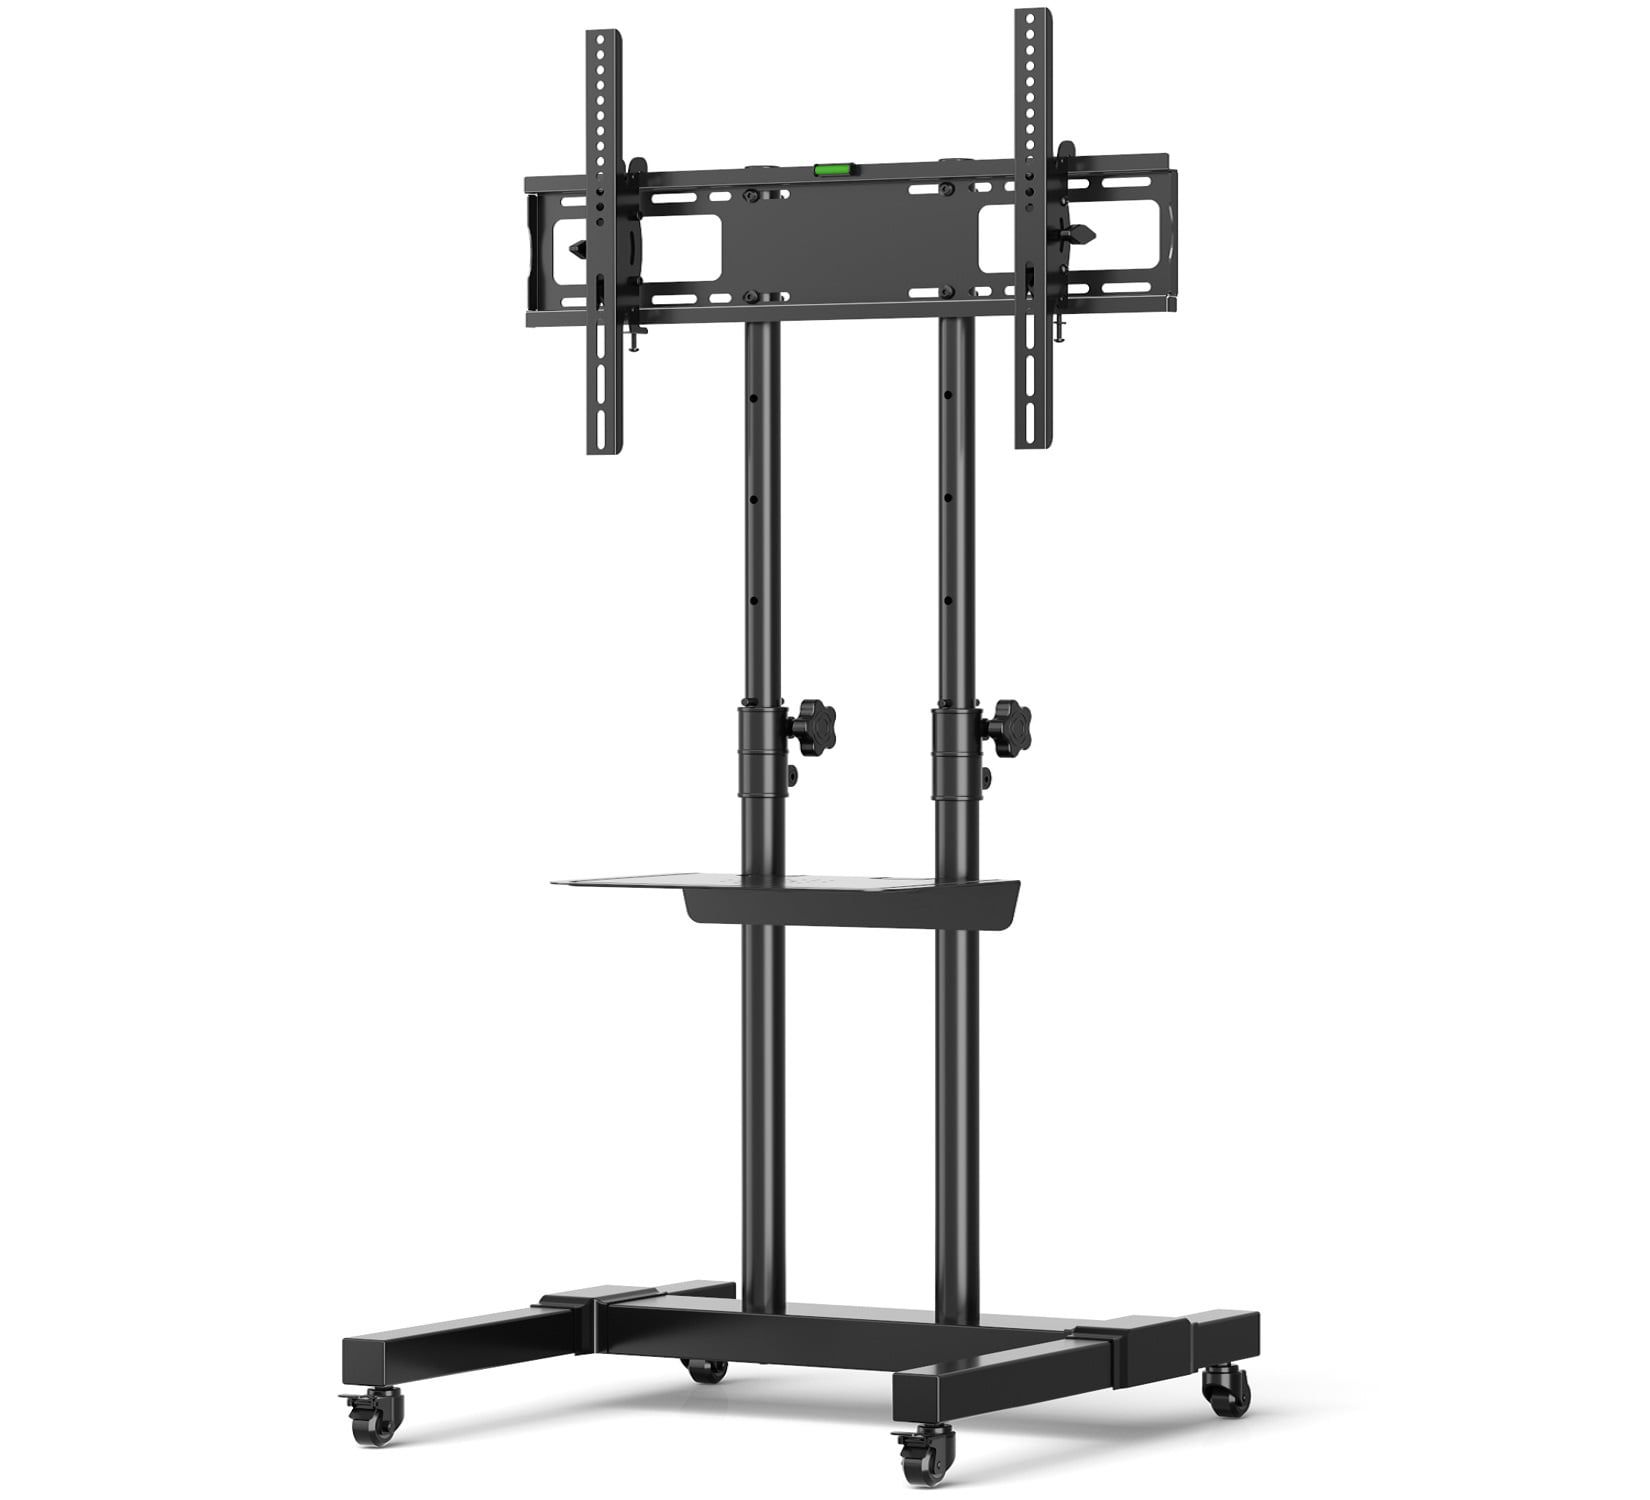 Modern Mobile Rolling Tv Stand For Tvs Up To 70" Height Adjustable With Regard To Mobile Tilt Rolling Tv Stands (Gallery 8 of 20)